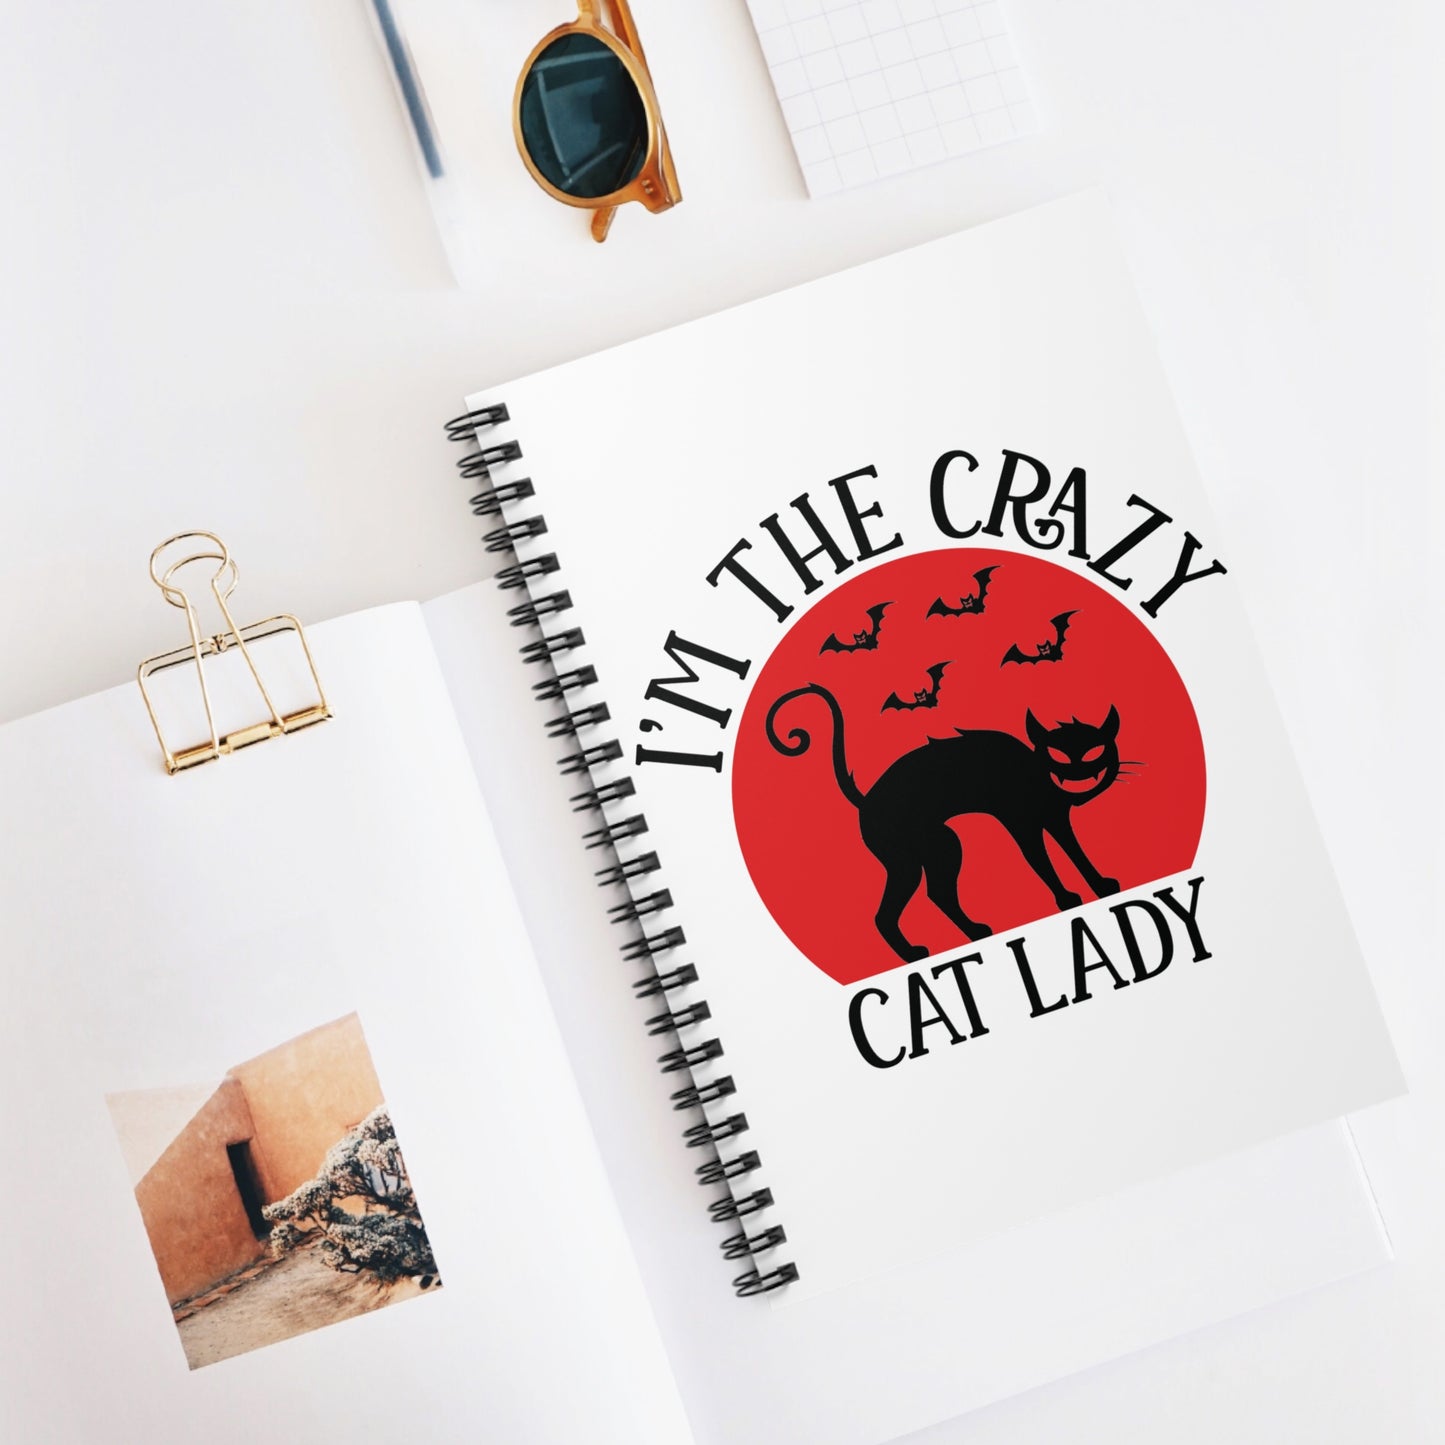 Crazy Cat Lady: Spiral Notebook - Log Books - Journals - Diaries - and More Custom Printed by TheGlassyLass